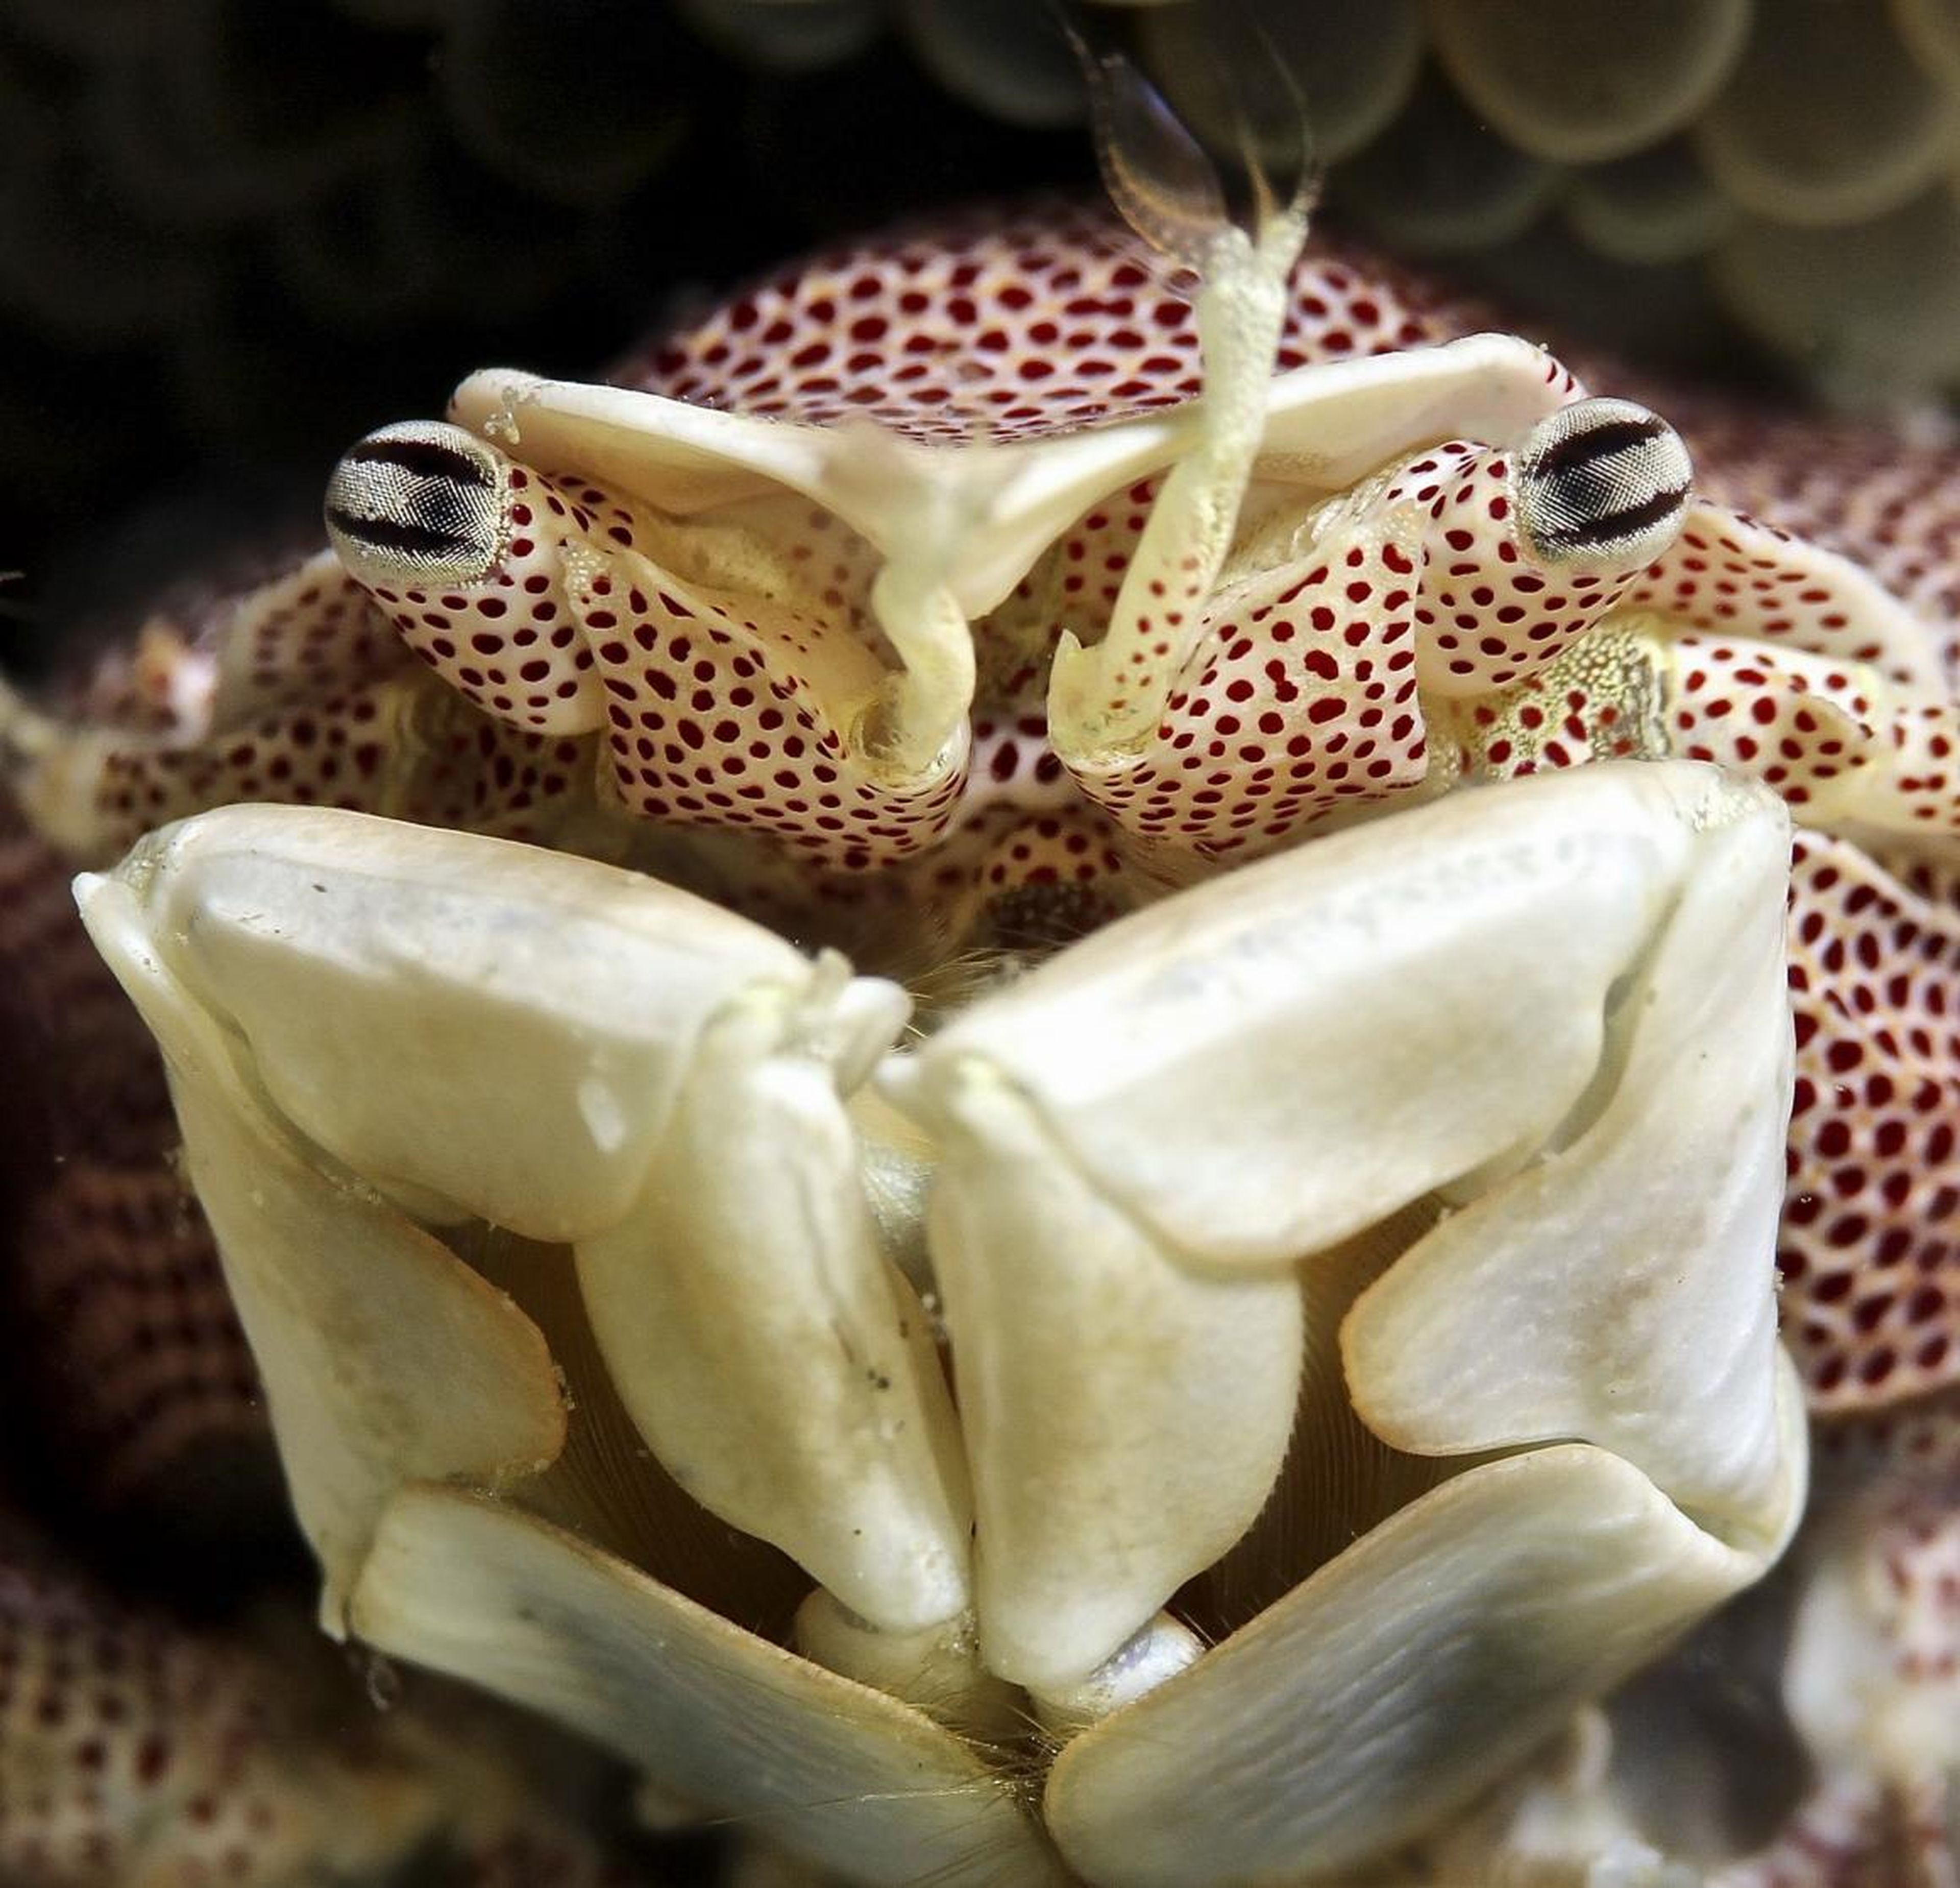 This intimate portrait of a Porcelain crab in the Banda sea off of Indonesia came from photographer Iyad Suleyman.